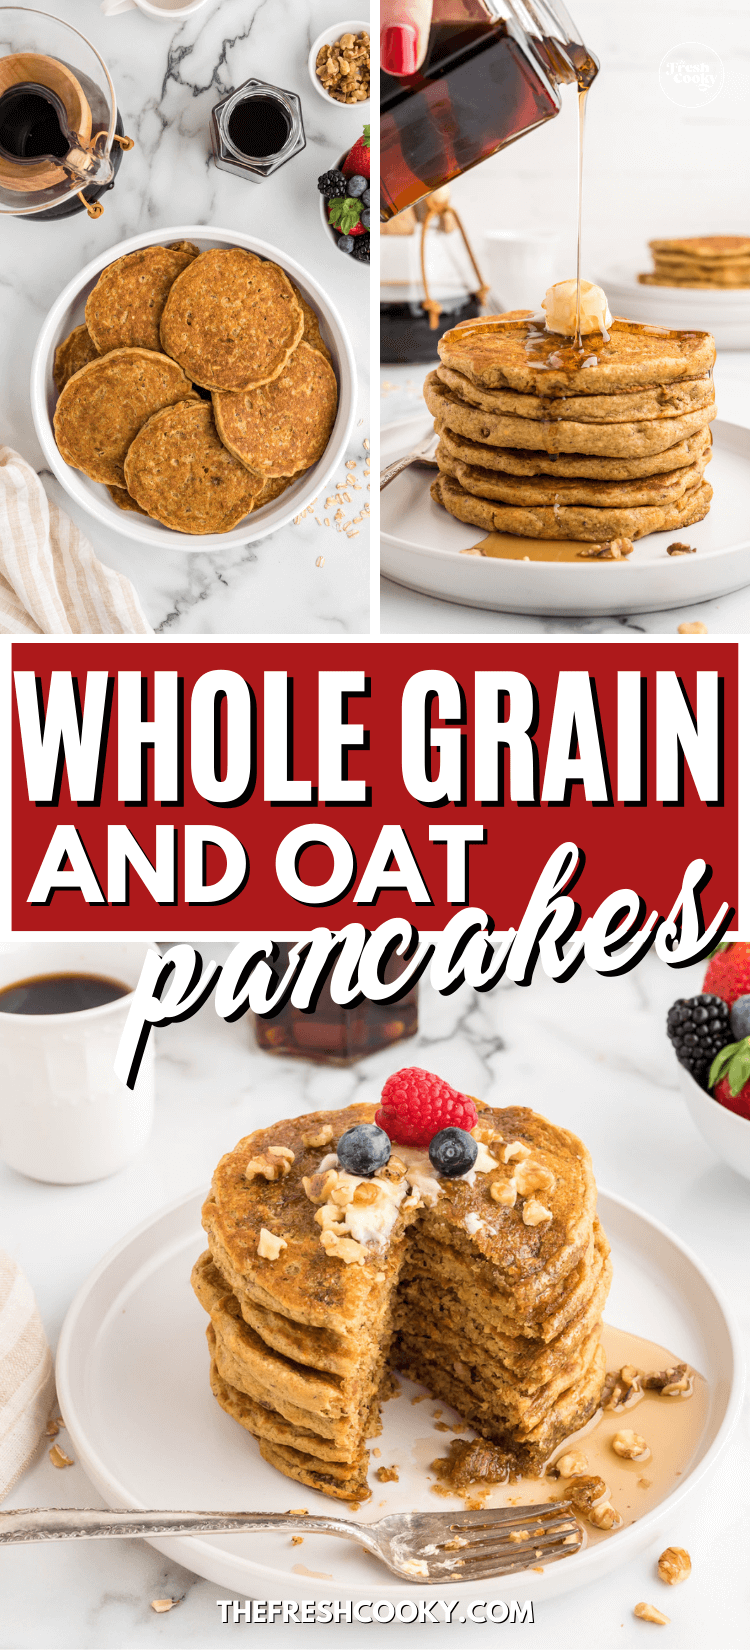 Whole Grain and Oat pancakes stacked on a plate, served with butter, berries and maple syrup, to pin.